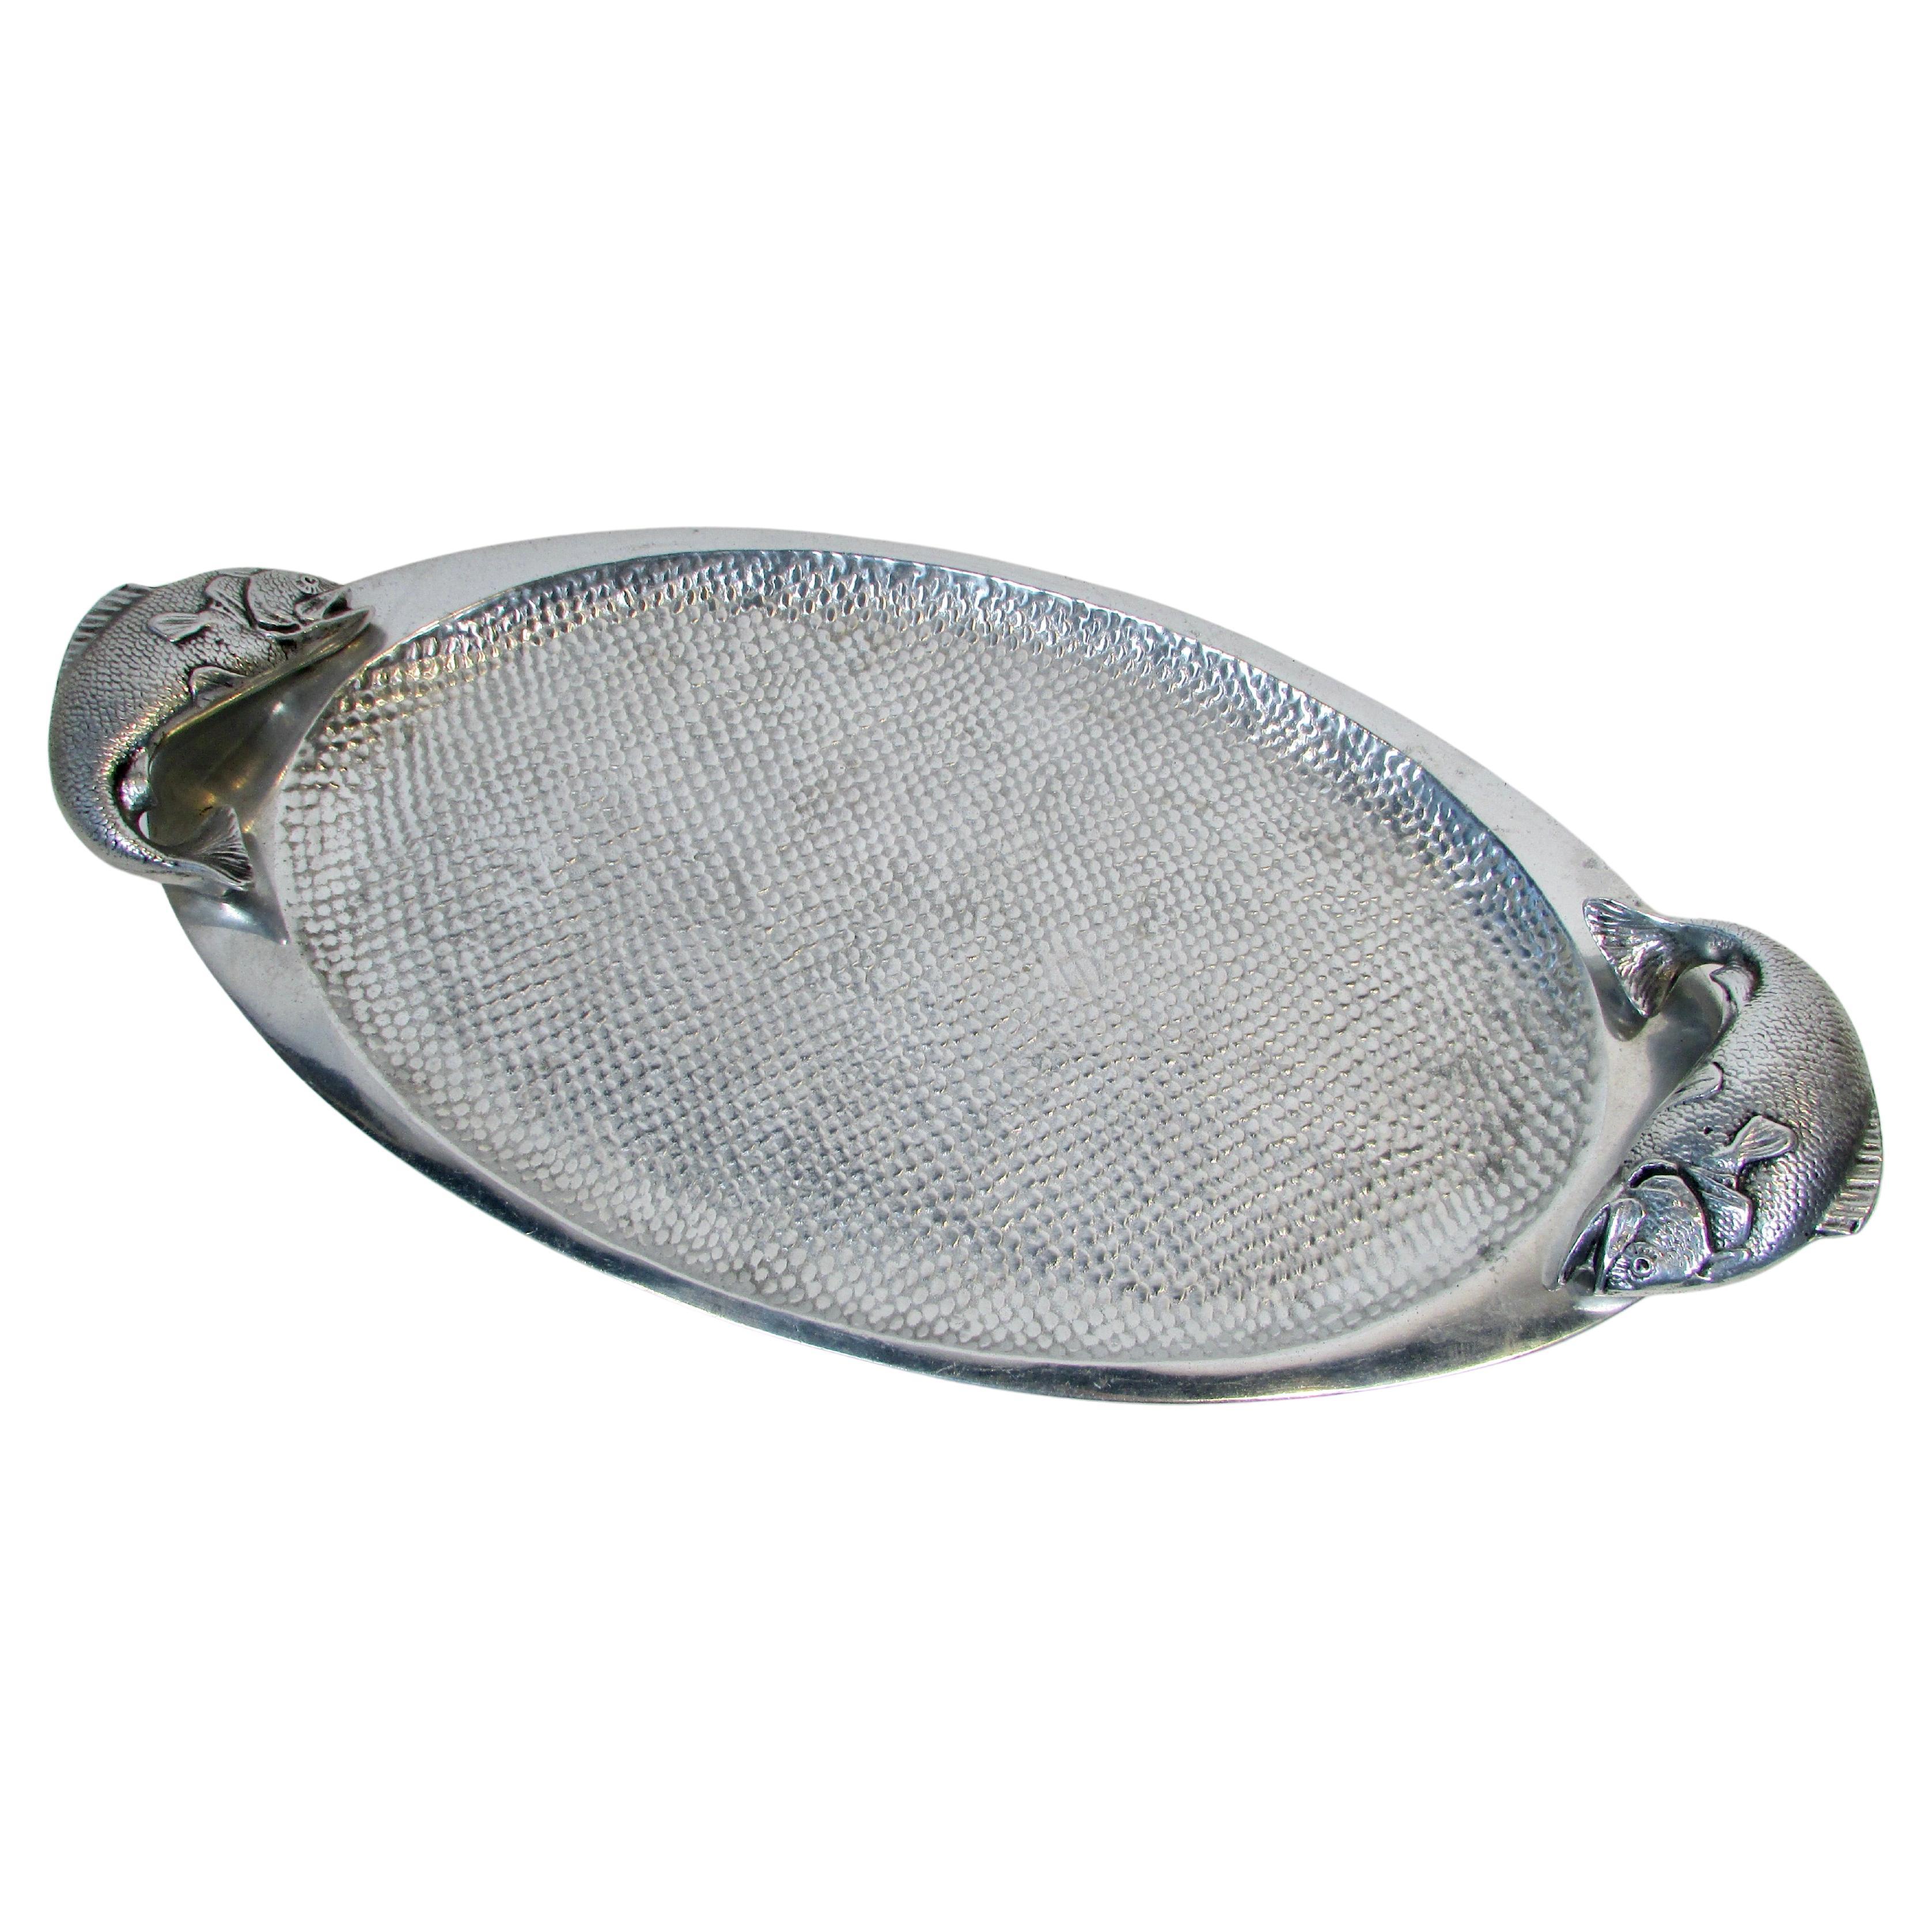 Bruce Fox Design Wilton Aluminum tray with Fish handles For Sale